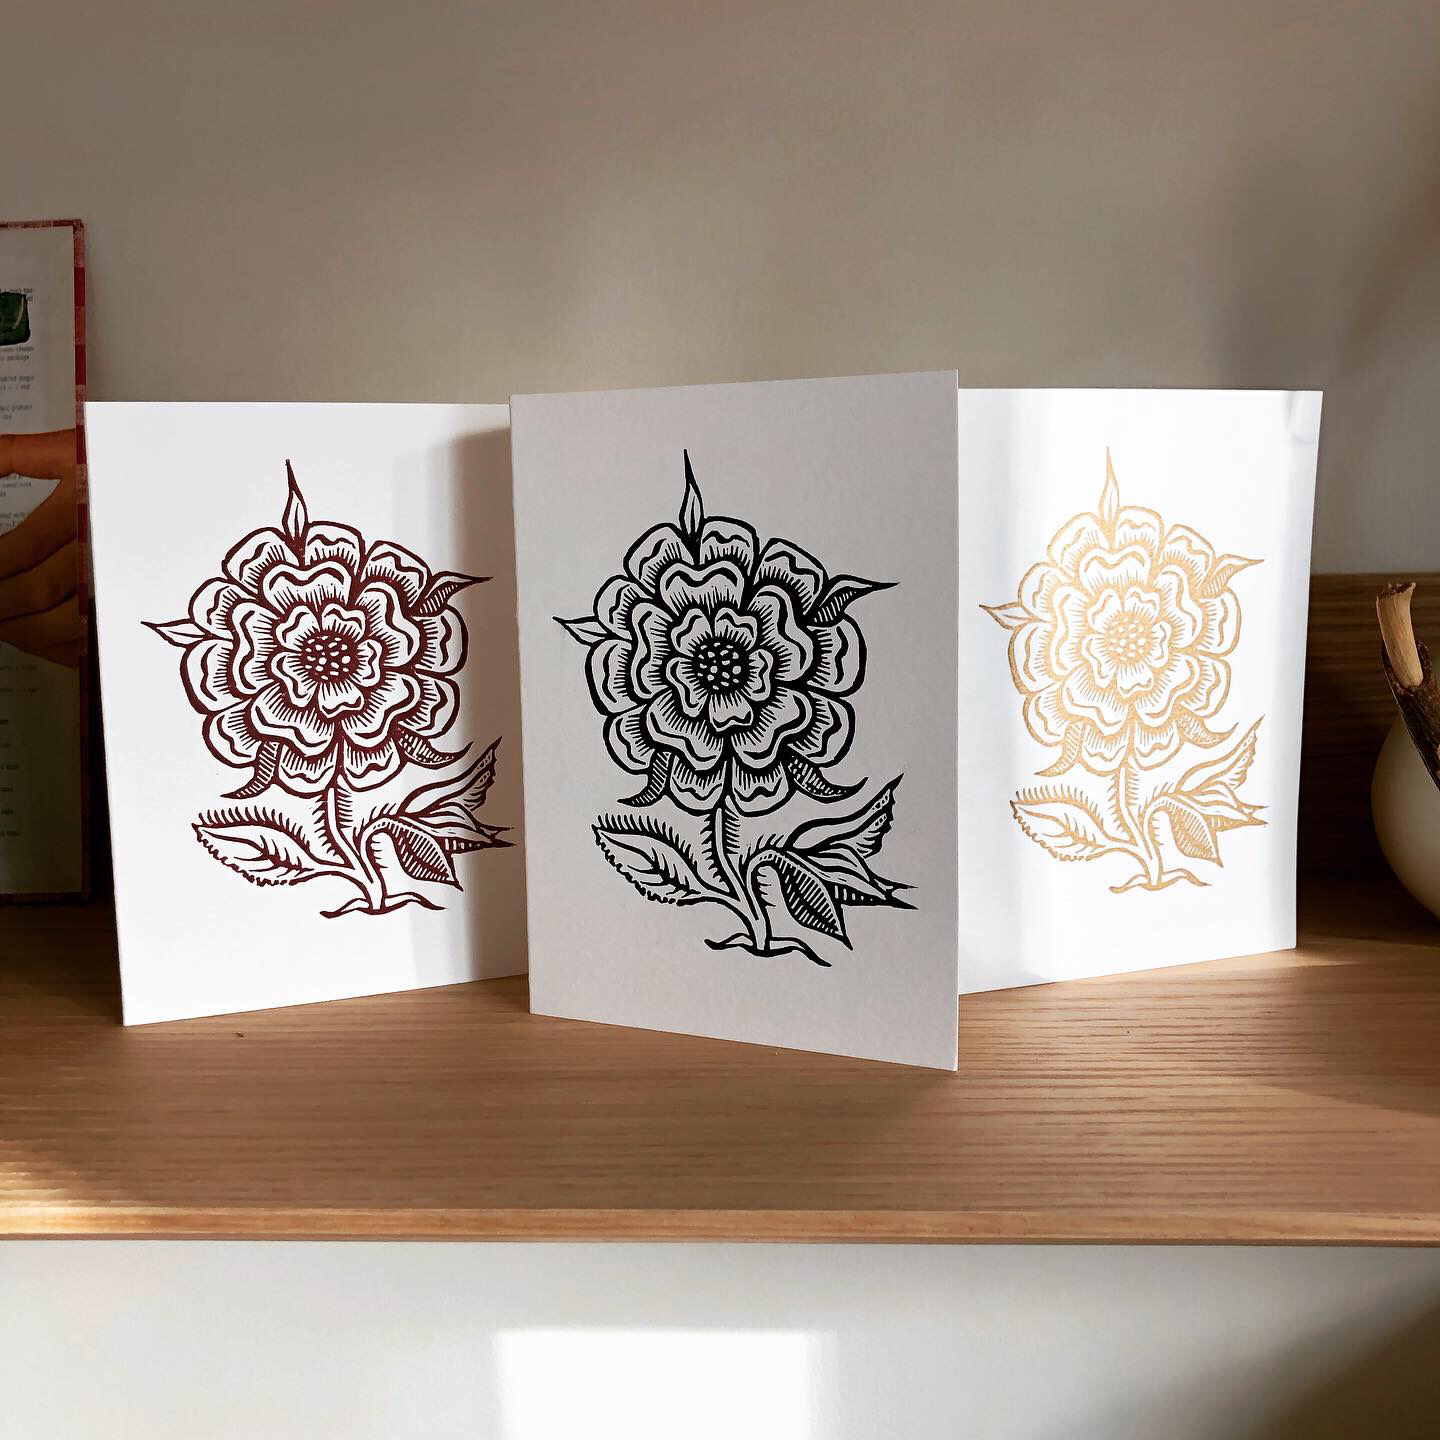 Three hand-printed linocut cards featuring a wild rose in red-violet, midnight blue, and metallic gold.